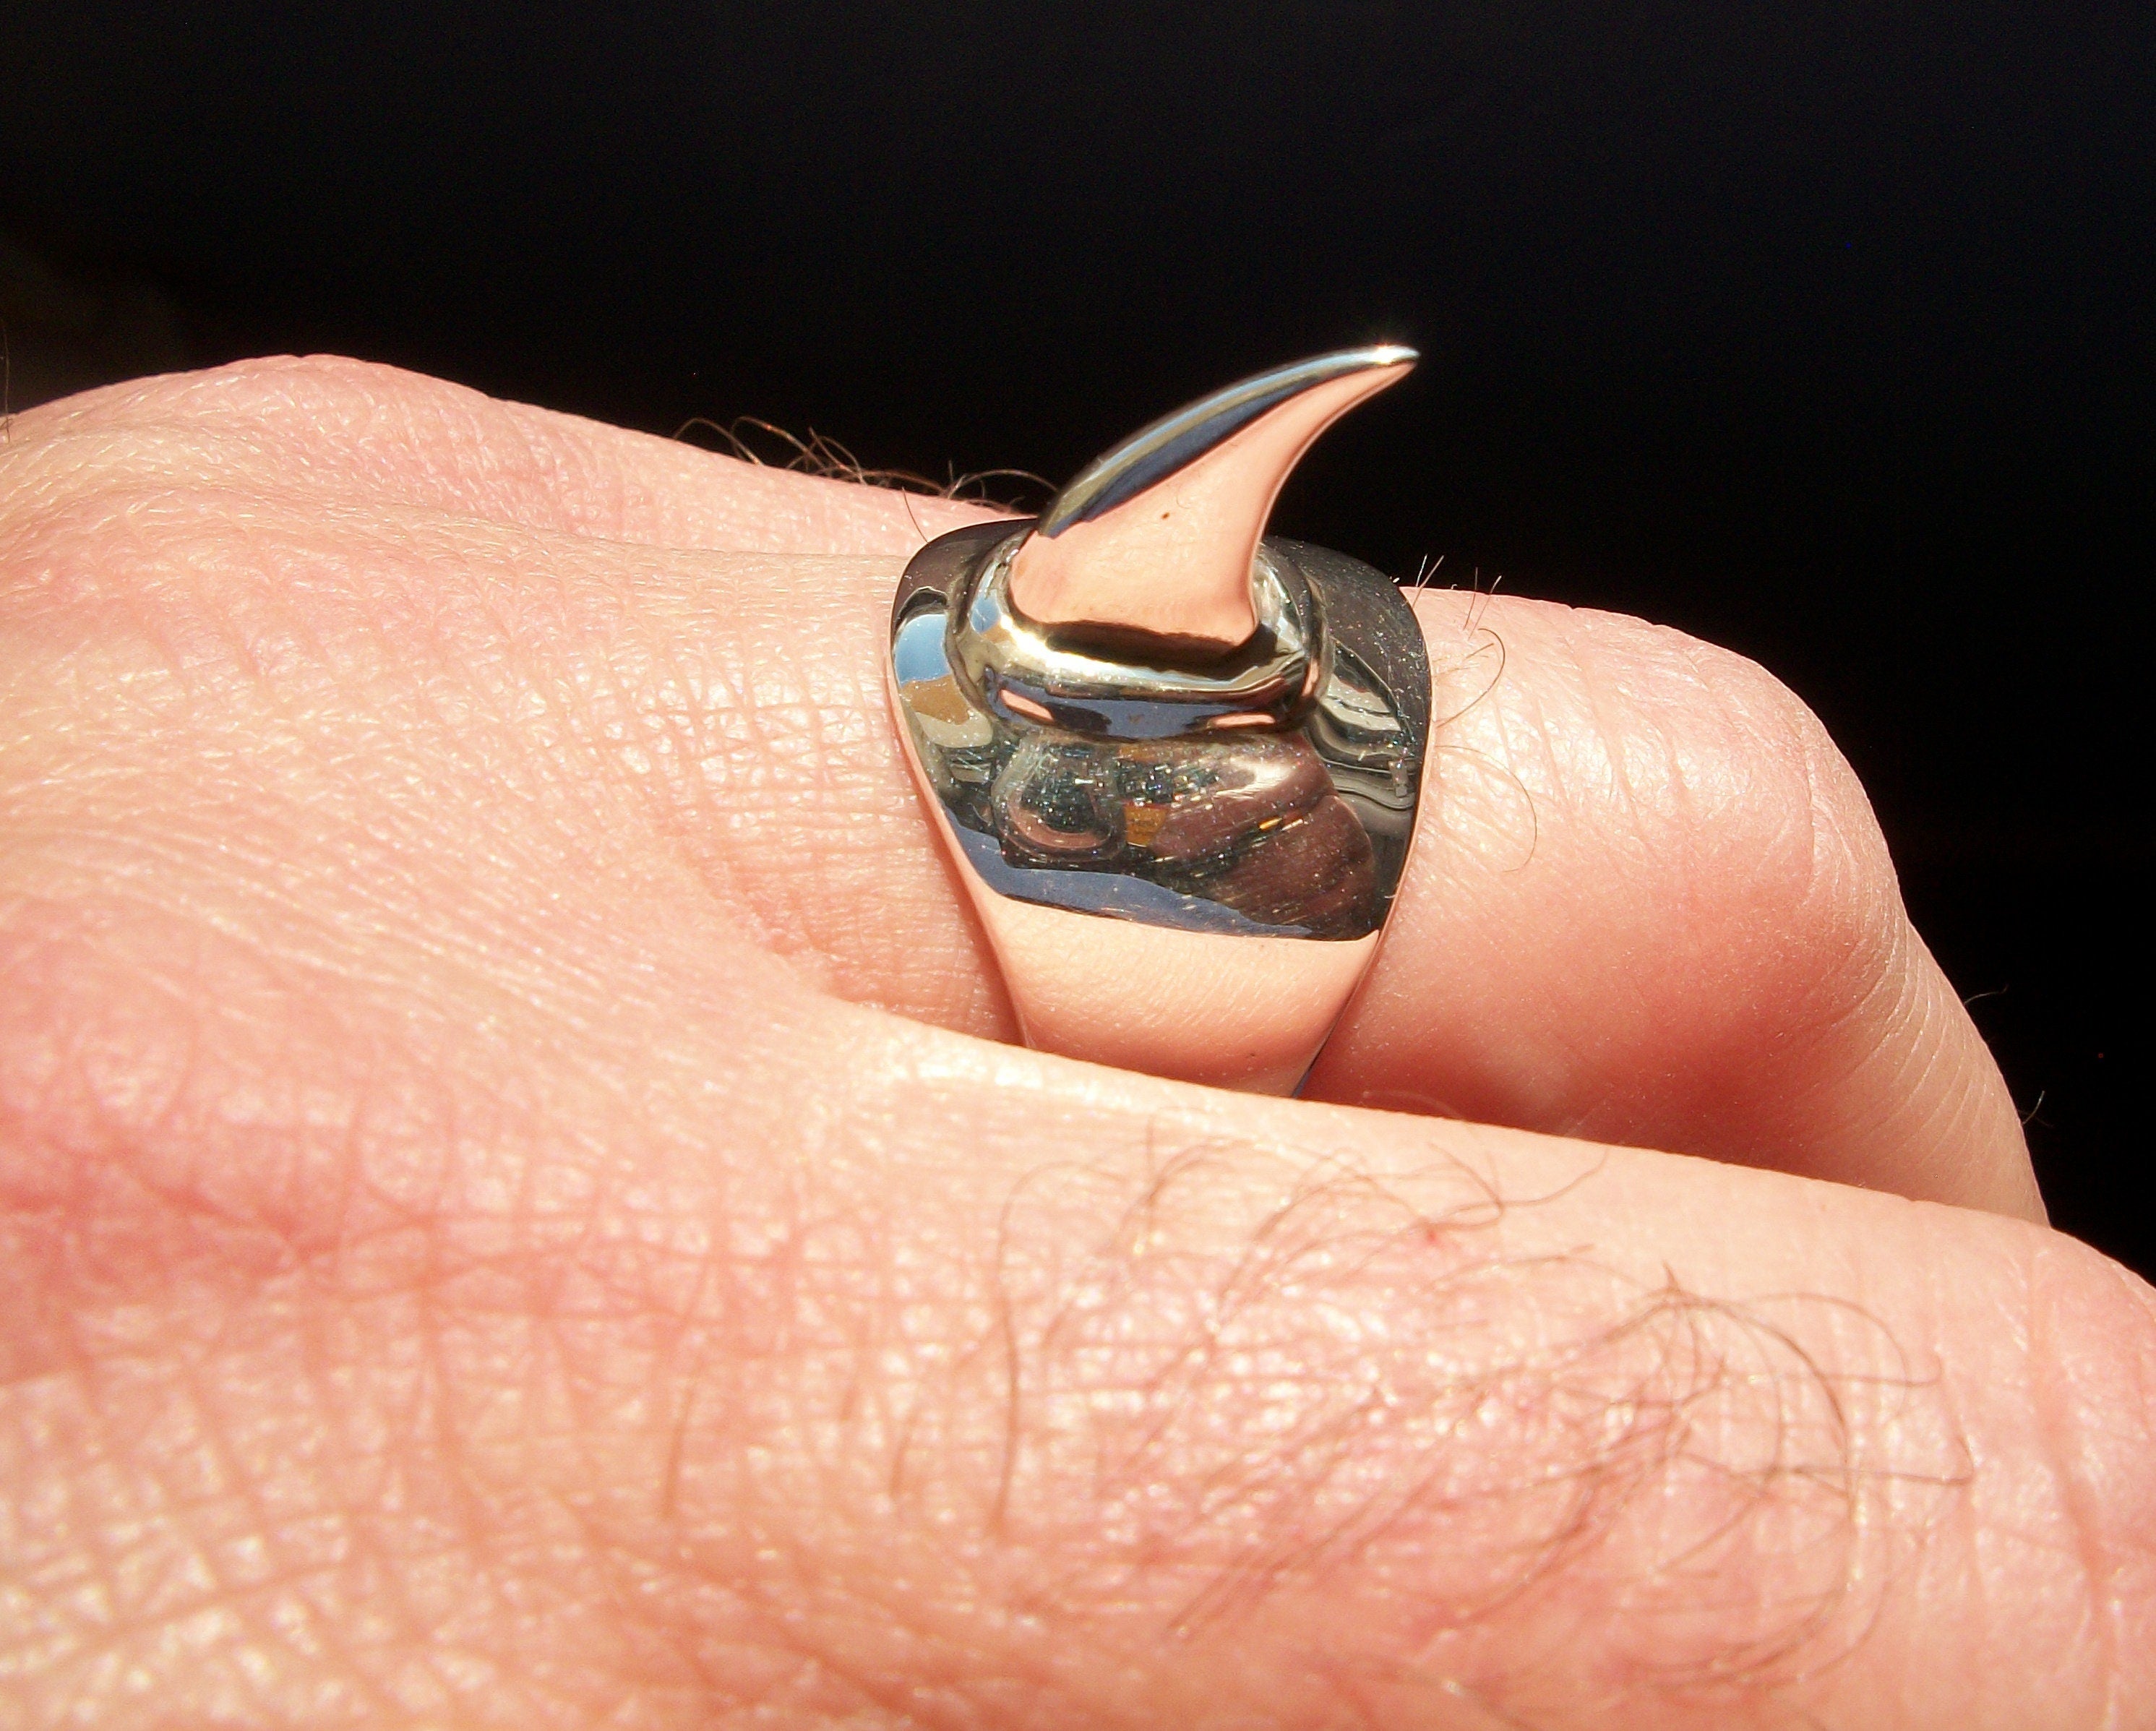 Claw ring - Sterling Silver Cat Claw Ring - Fetish Bizarre ring - ALL SIZES